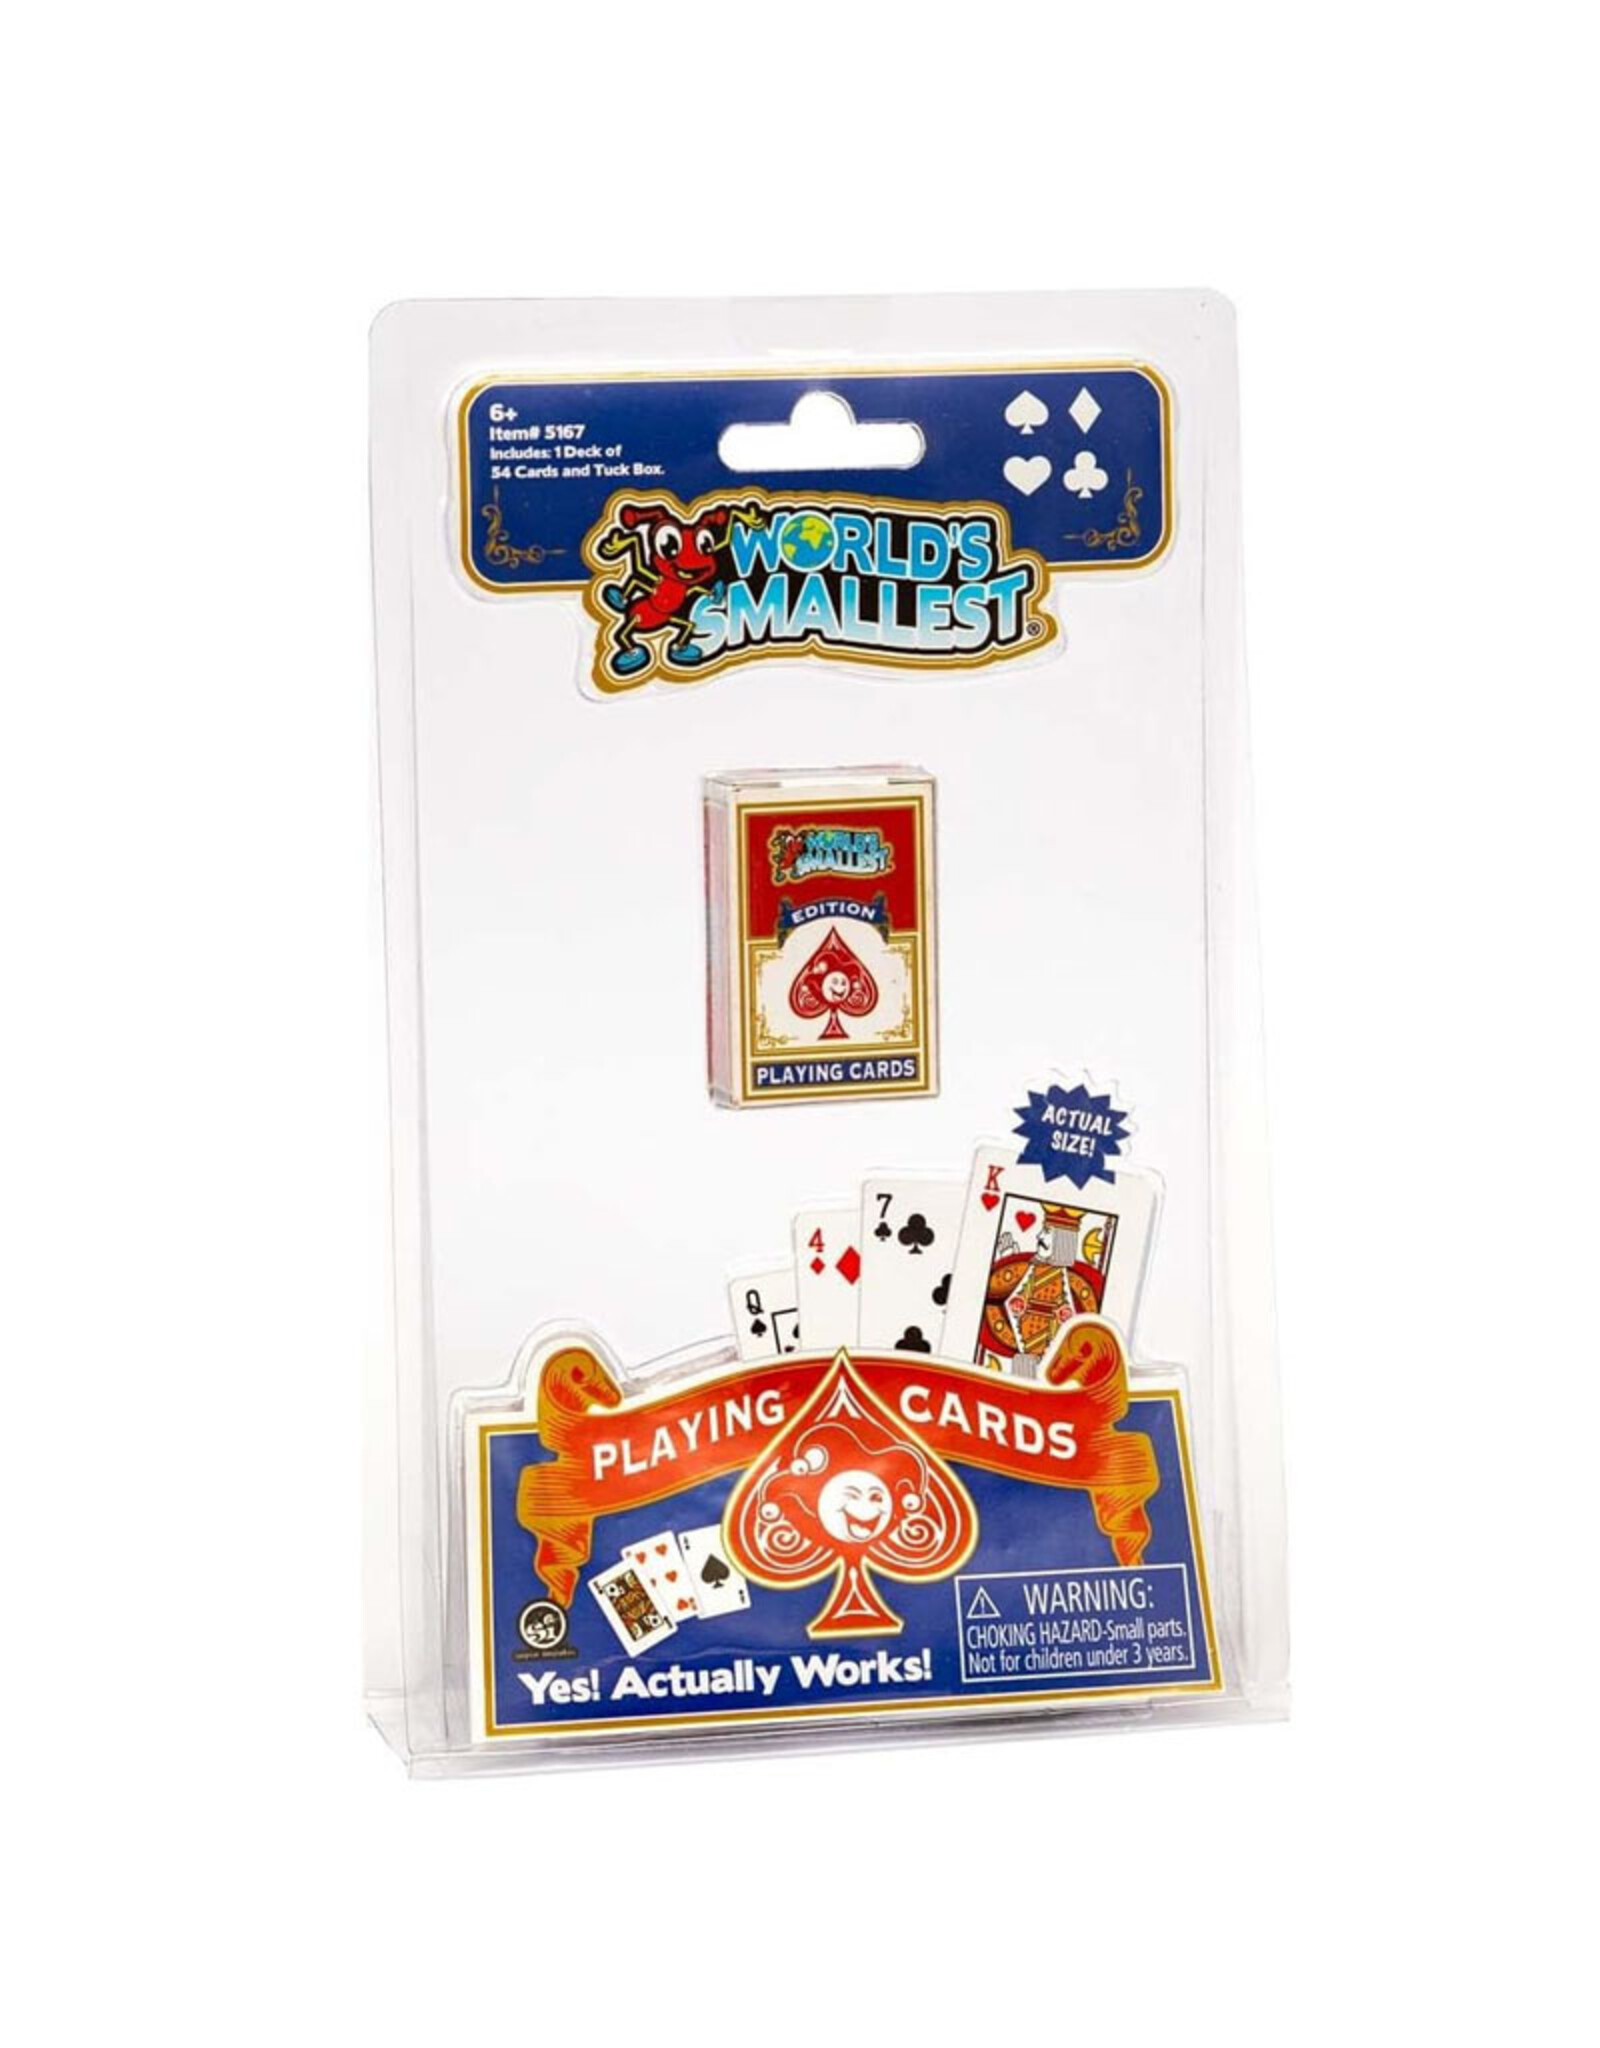 Super Impulse World's Smallest: Playing Cards